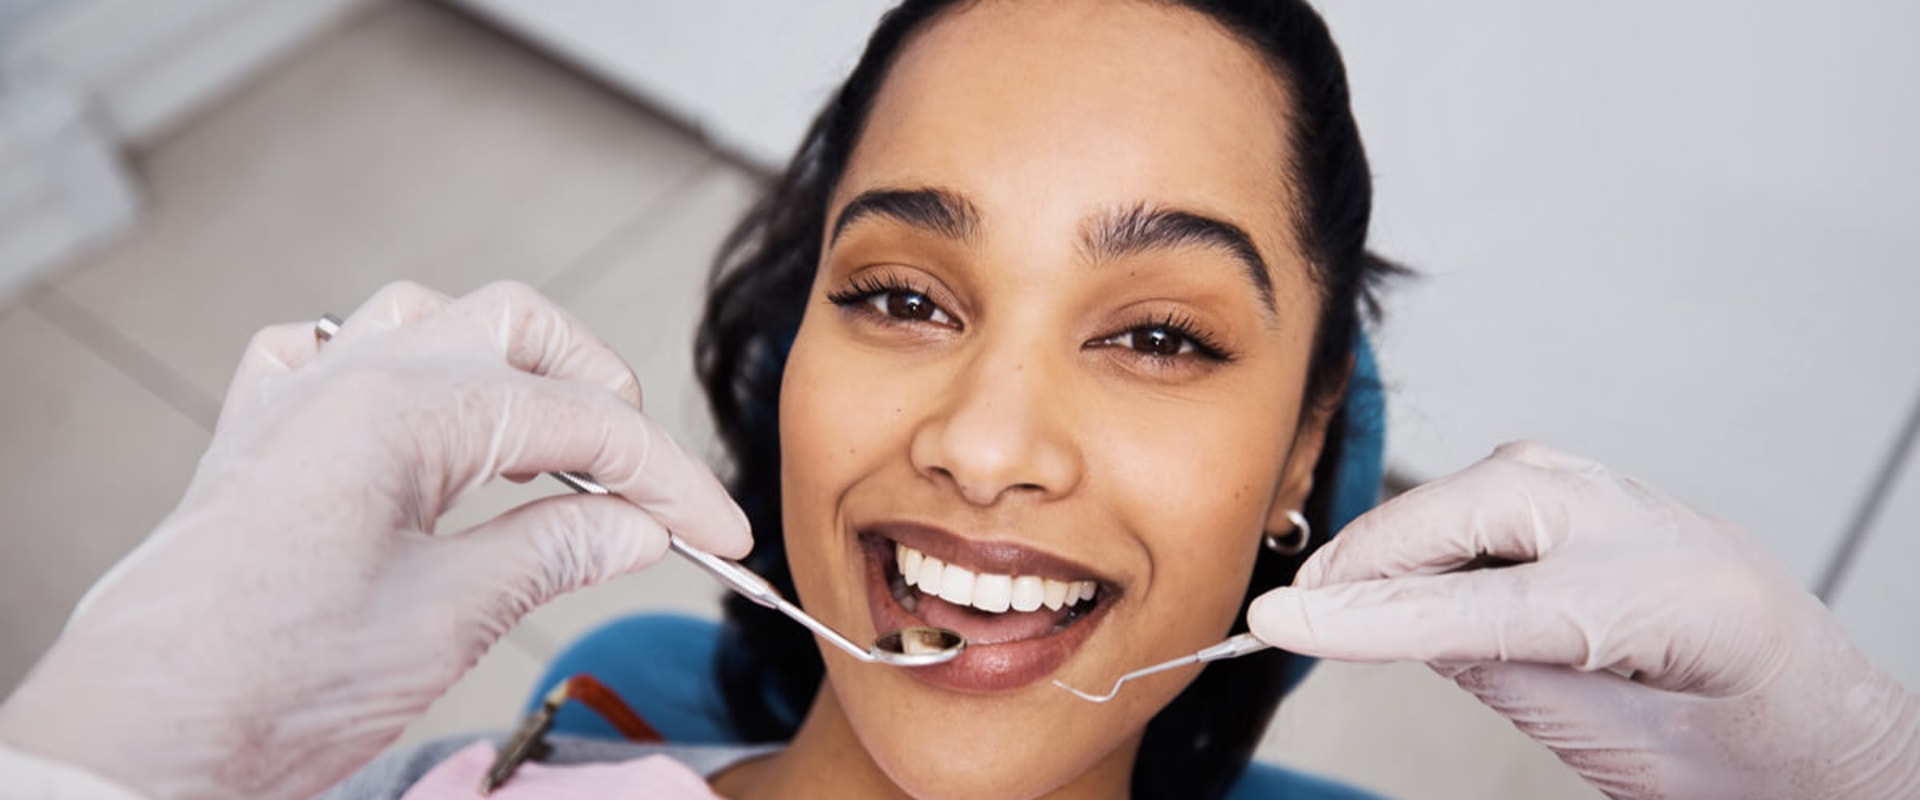 Popular Laser Dentistry Treatments: How It's Revolutionizing Your Dentist Visit In Dripping Springs, TX